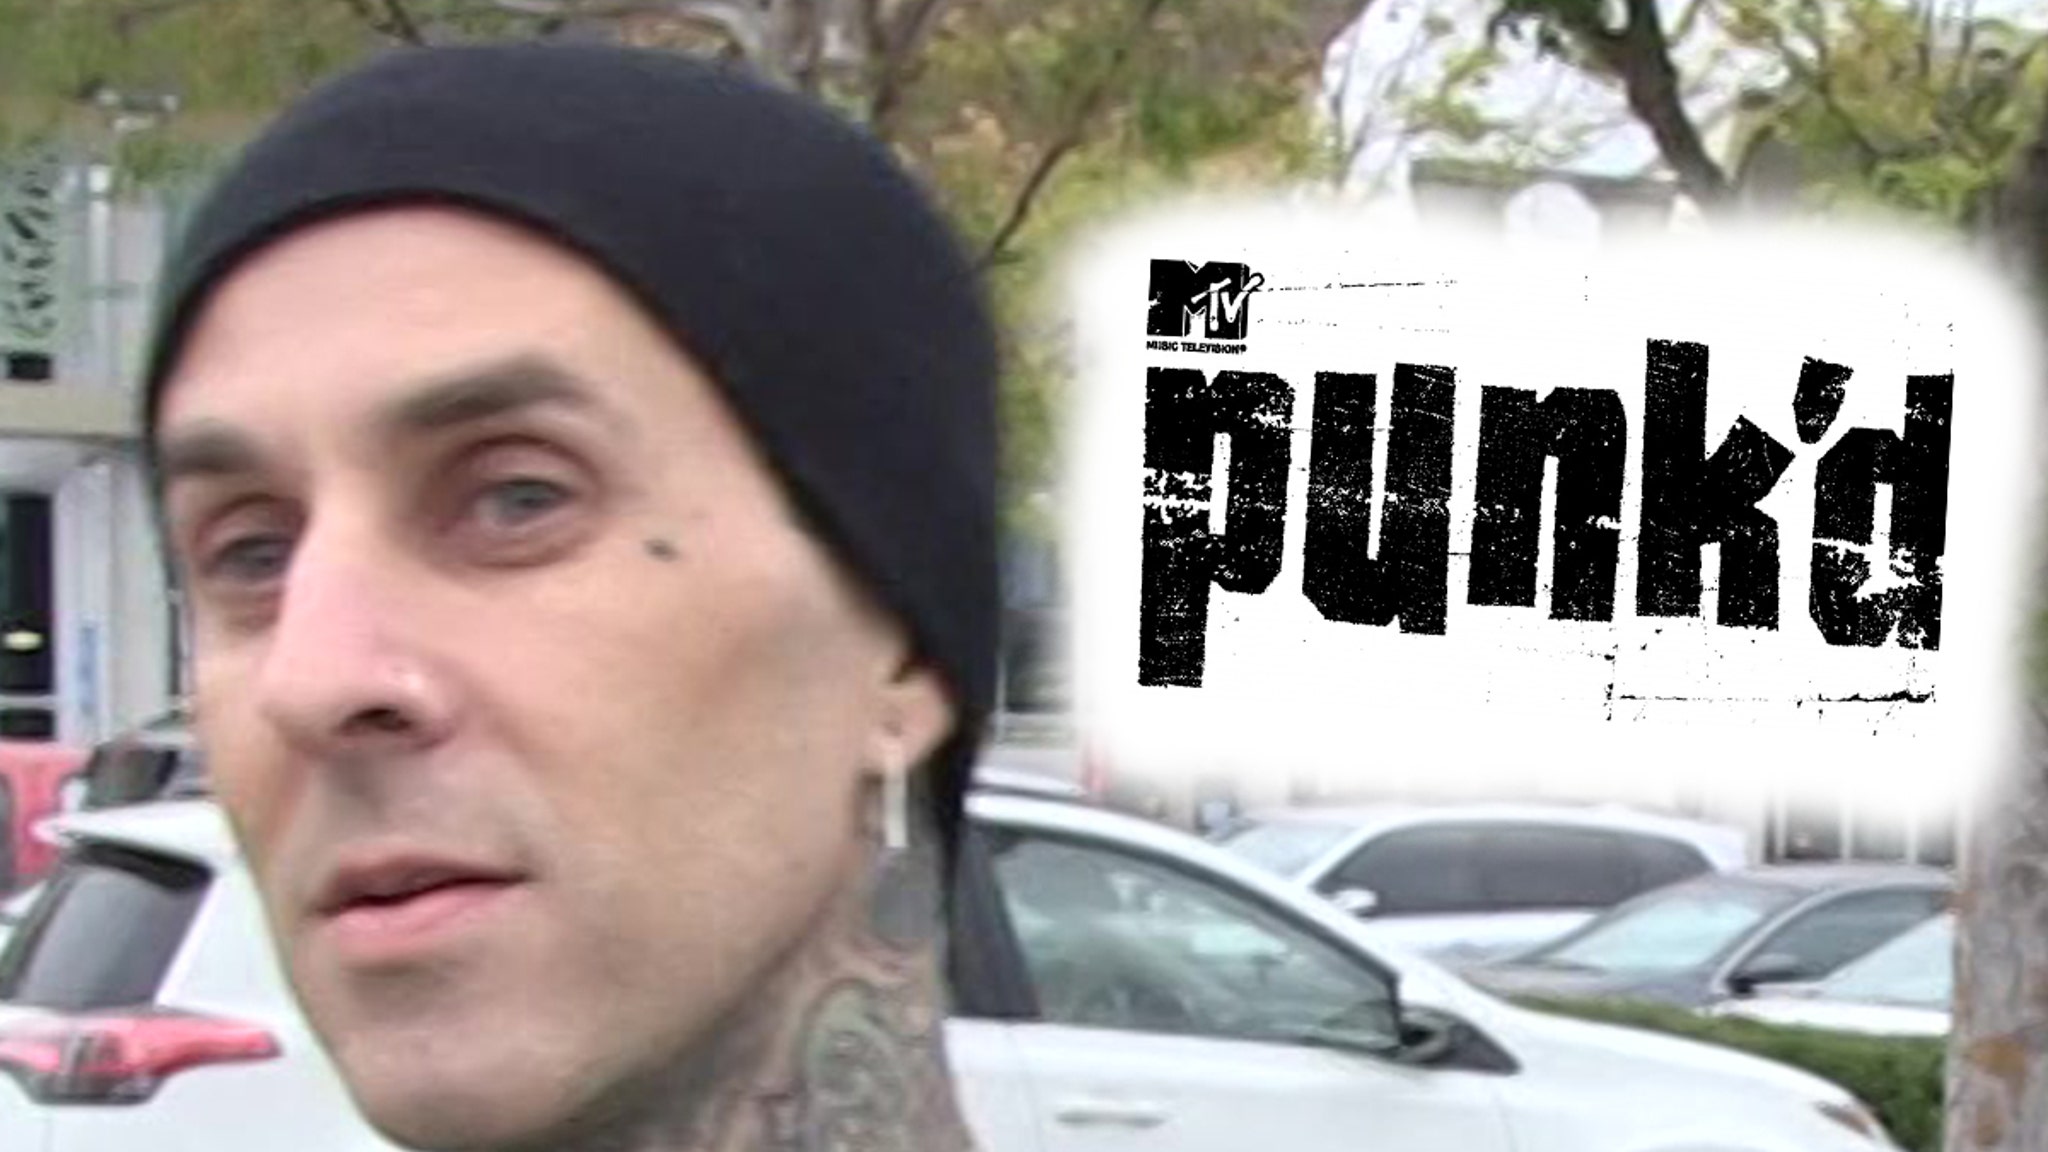 Travis Barker Didn't Hurl Homophobic Slur on 'Punk'd', Actor From Resurfaced Clip Says thumbnail